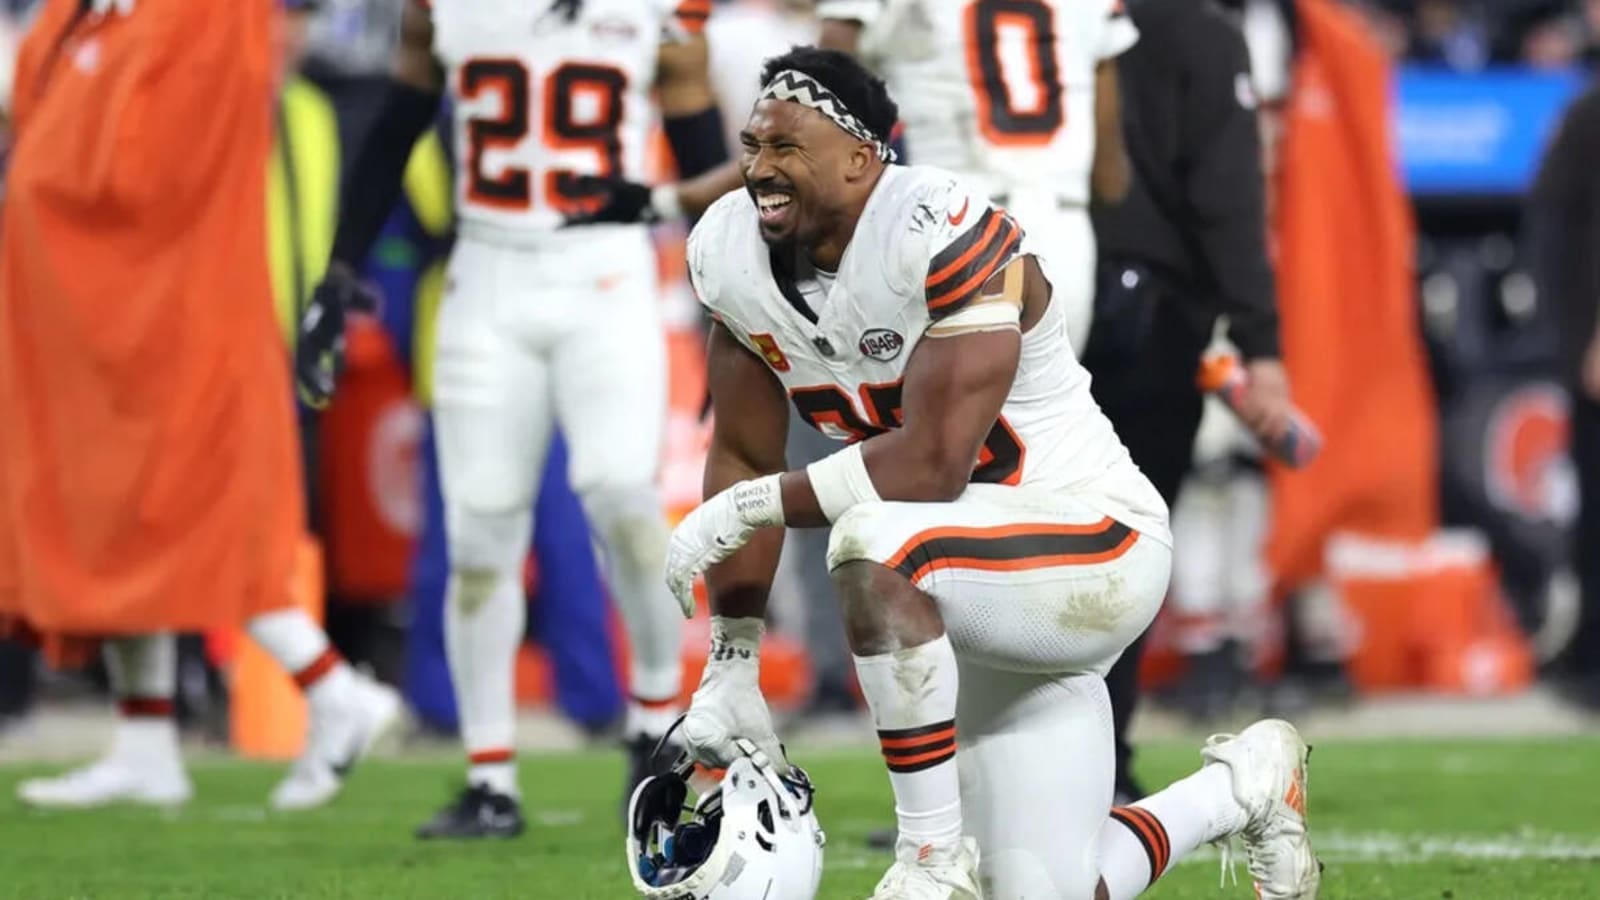 Cleveland Browns’ updated roster after a wild first week of NFL free agency and trades